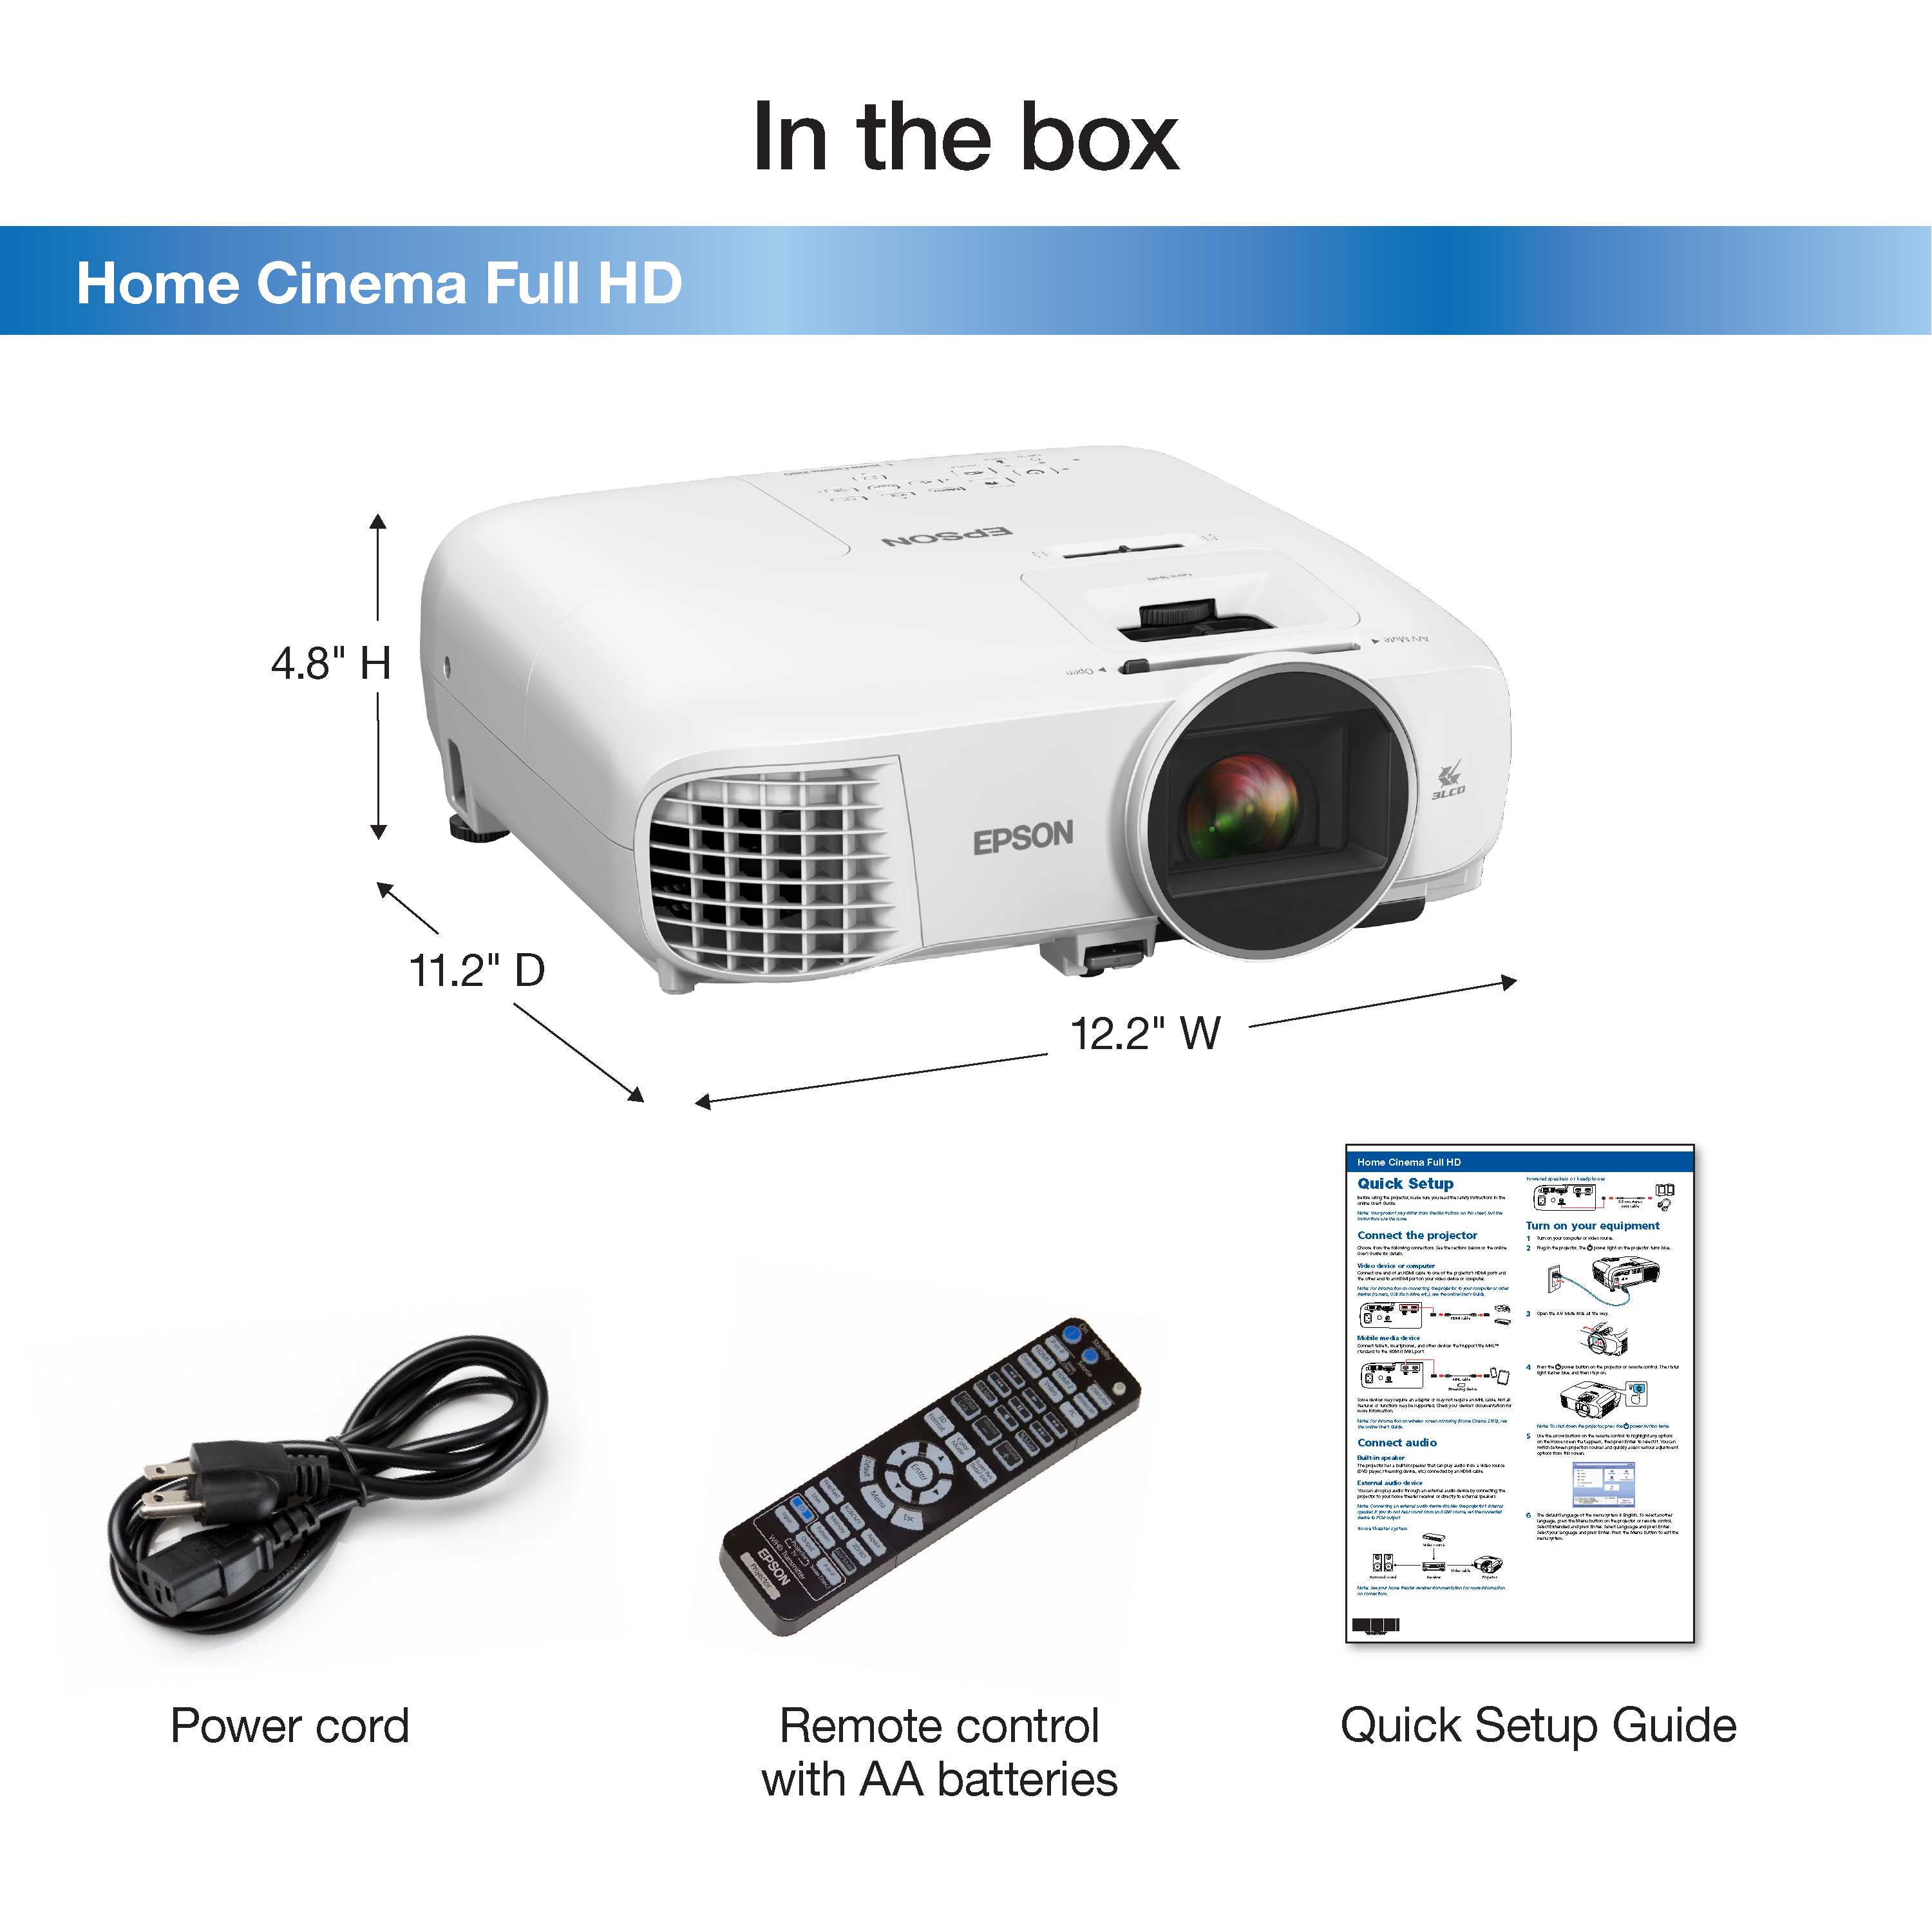 Epson Home Cinema Full HD, 1080p, 2,500 lumens color brightness (color light output), 2,500 lumens white brightness (white light output), 2x HDMI (1 MHL), 3LCD projector - image 2 of 6